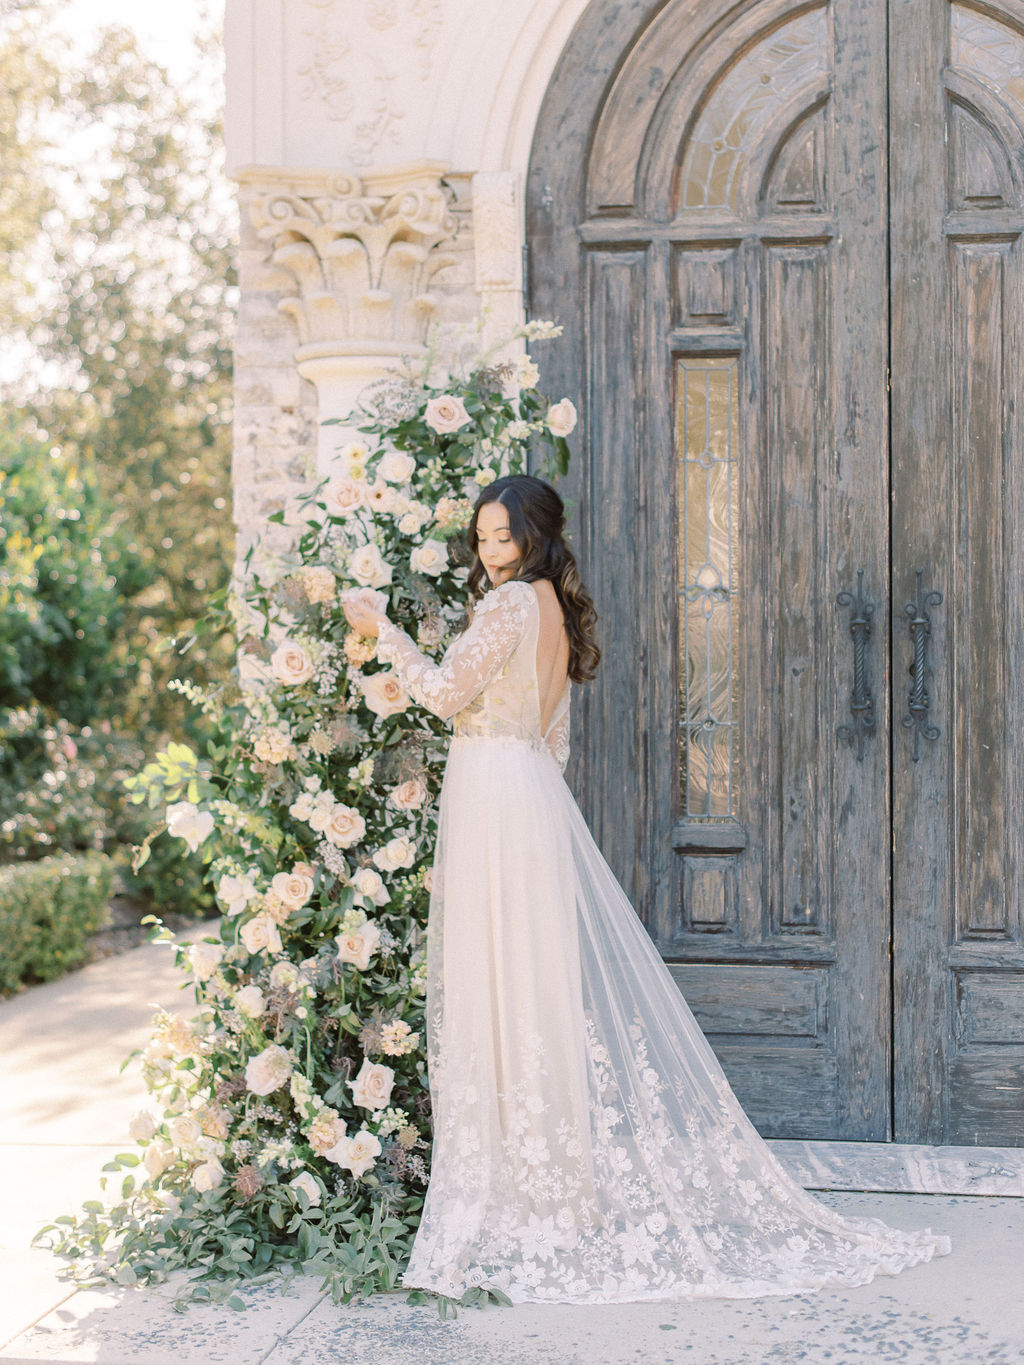 Whimsical meets old-world Garden vibe in this intimate wedding